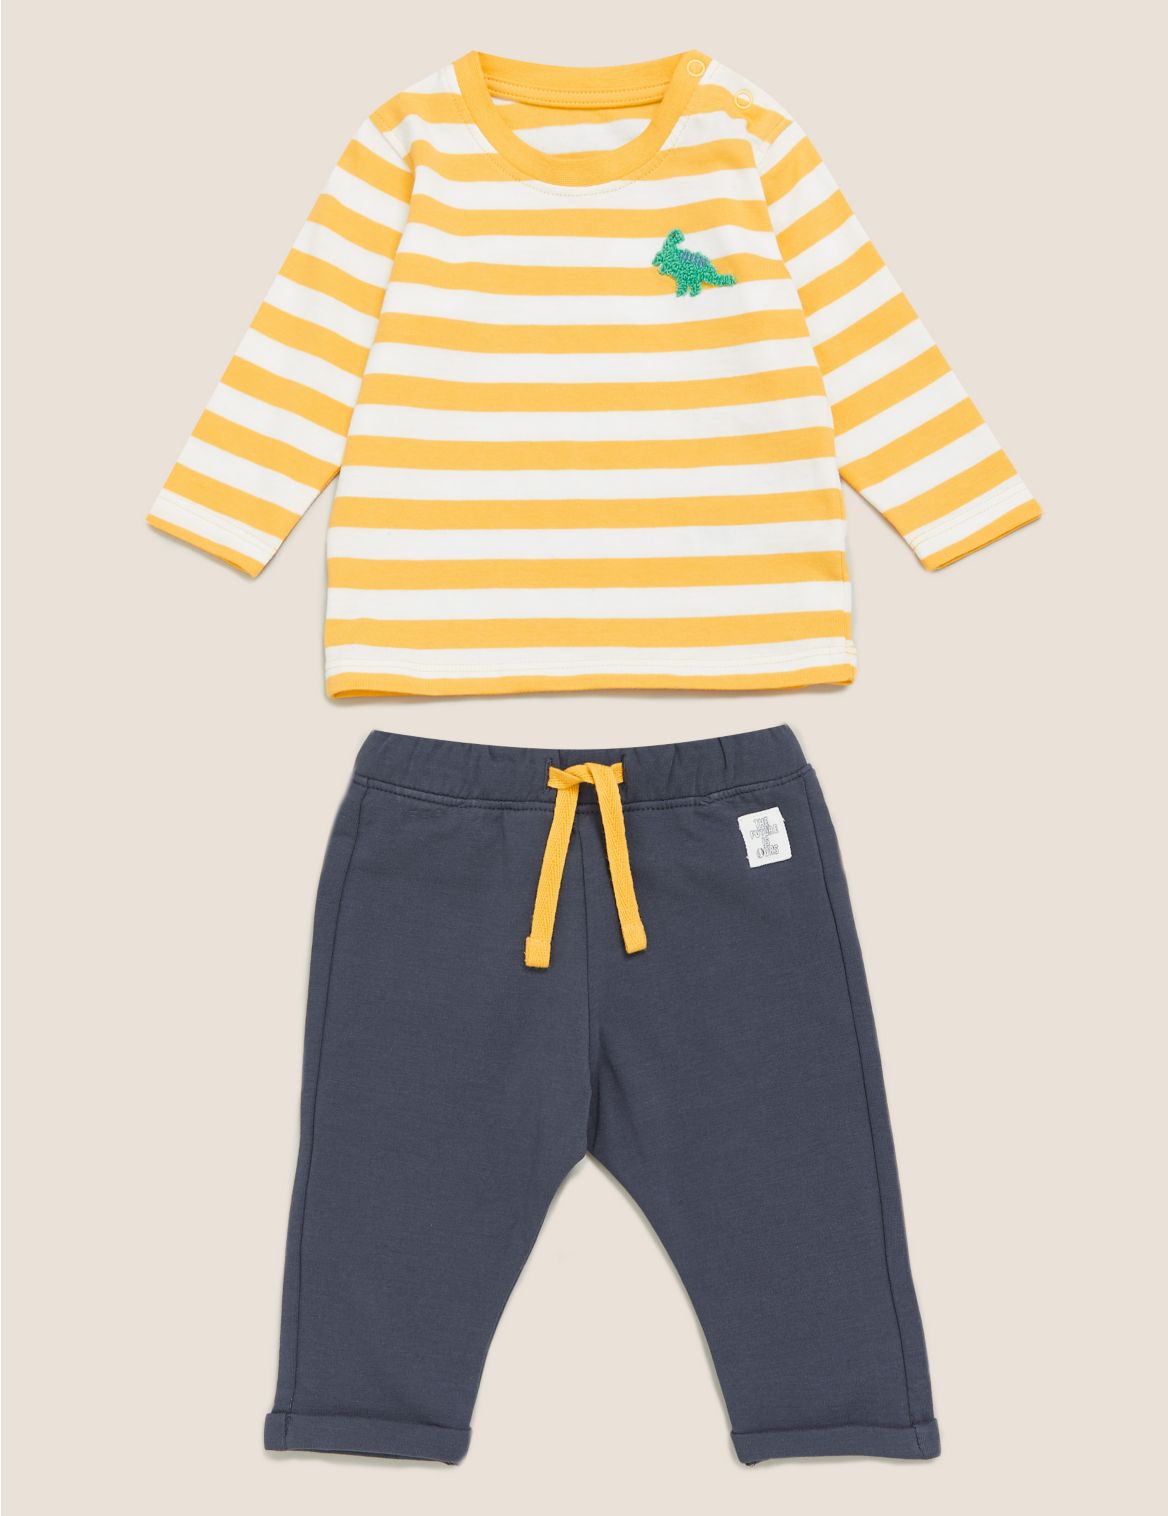 2pc Cotton Stripe Top Outfit (0-3 Yrs) yellow